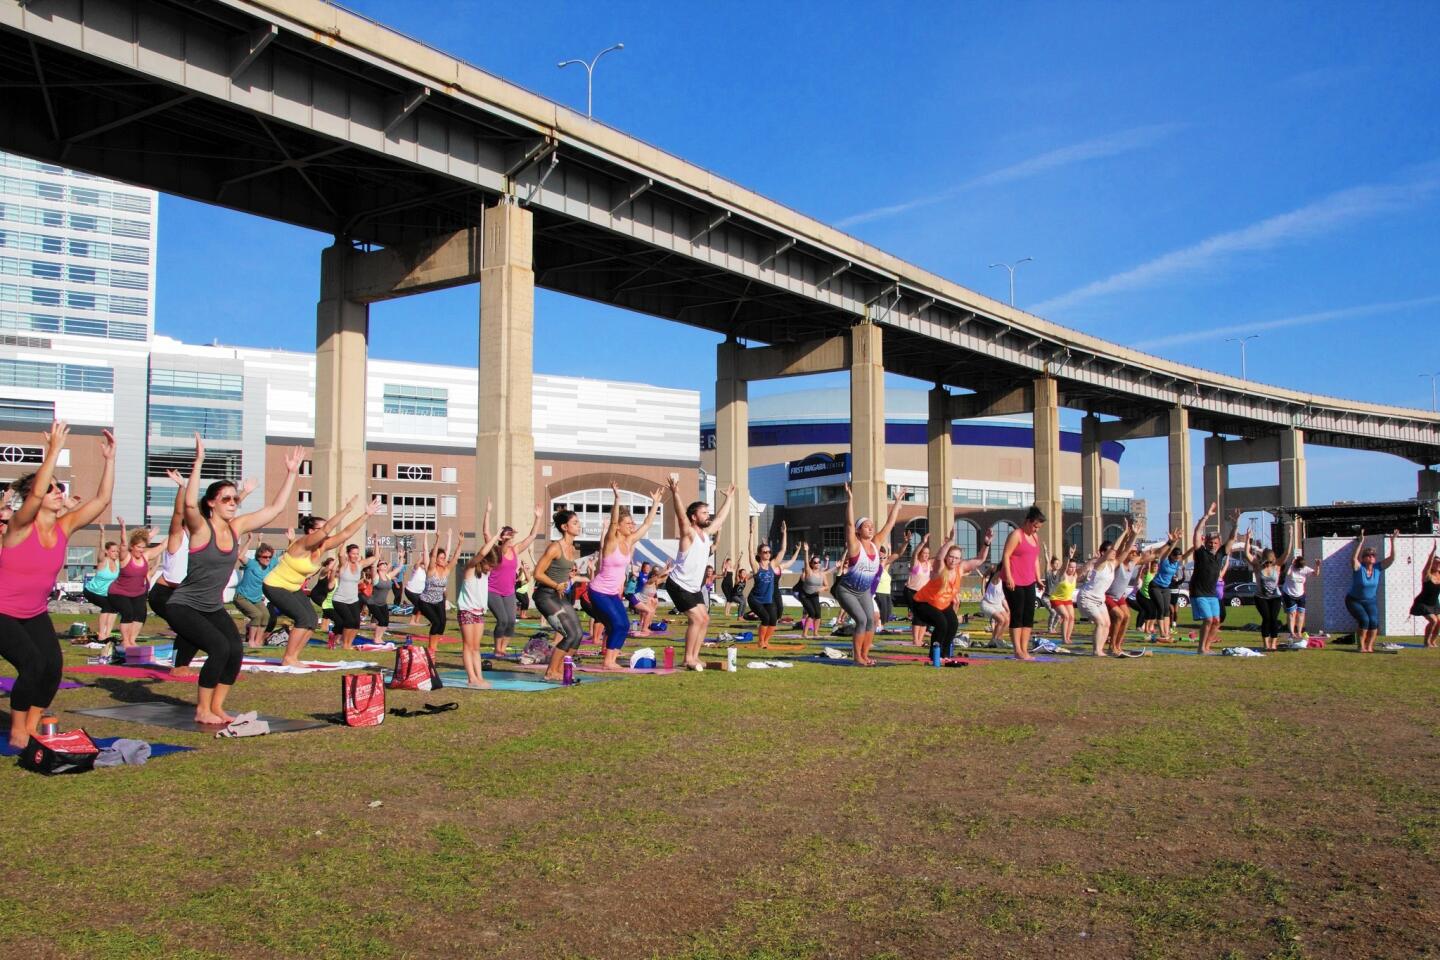 Canalside offers more than just water activities, including this outdoor yoga class under a highway overpass.